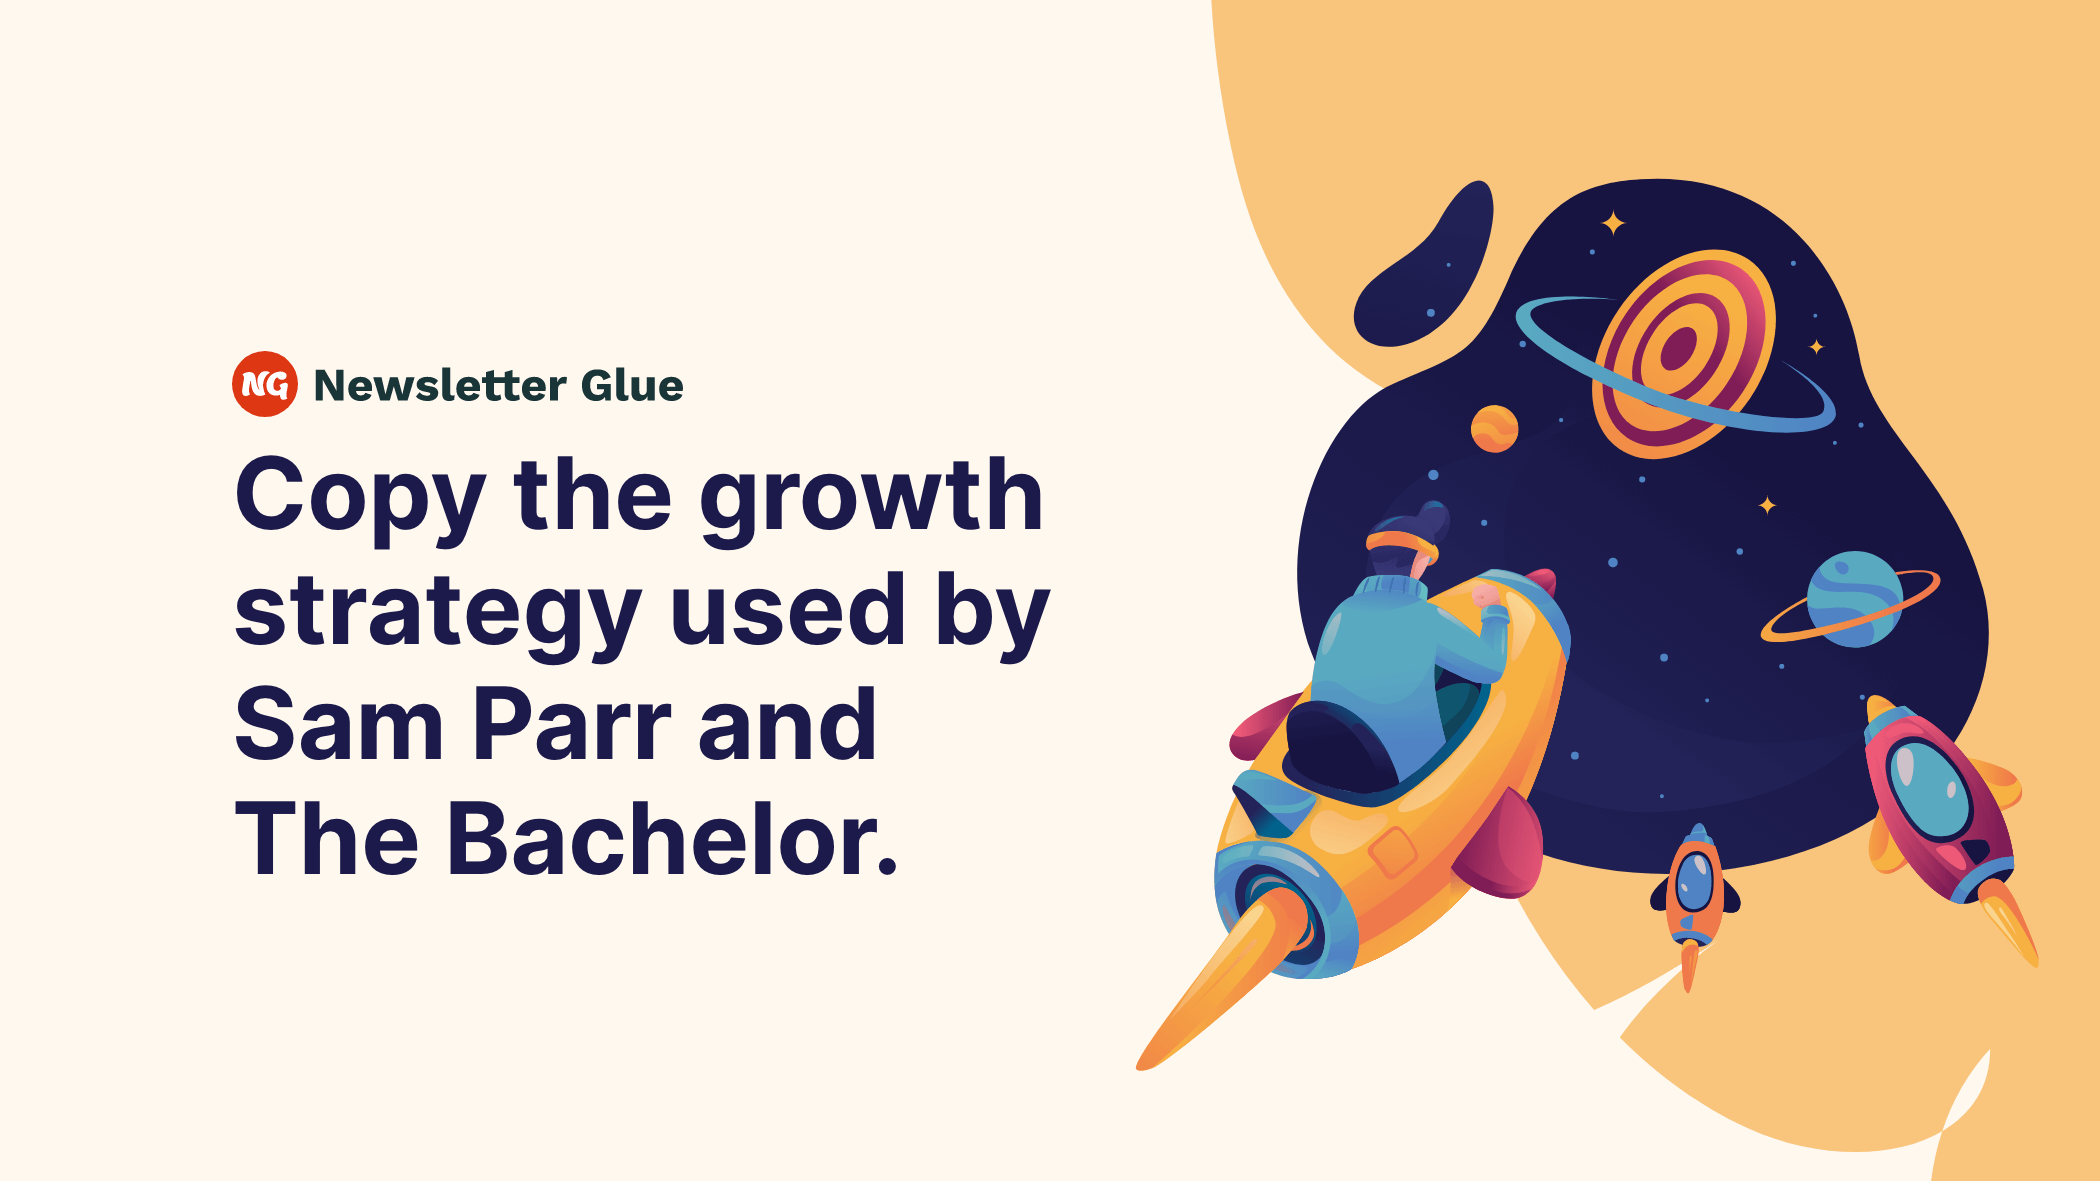 Copy the growth strategy used by Sam Parr and The Bachelor